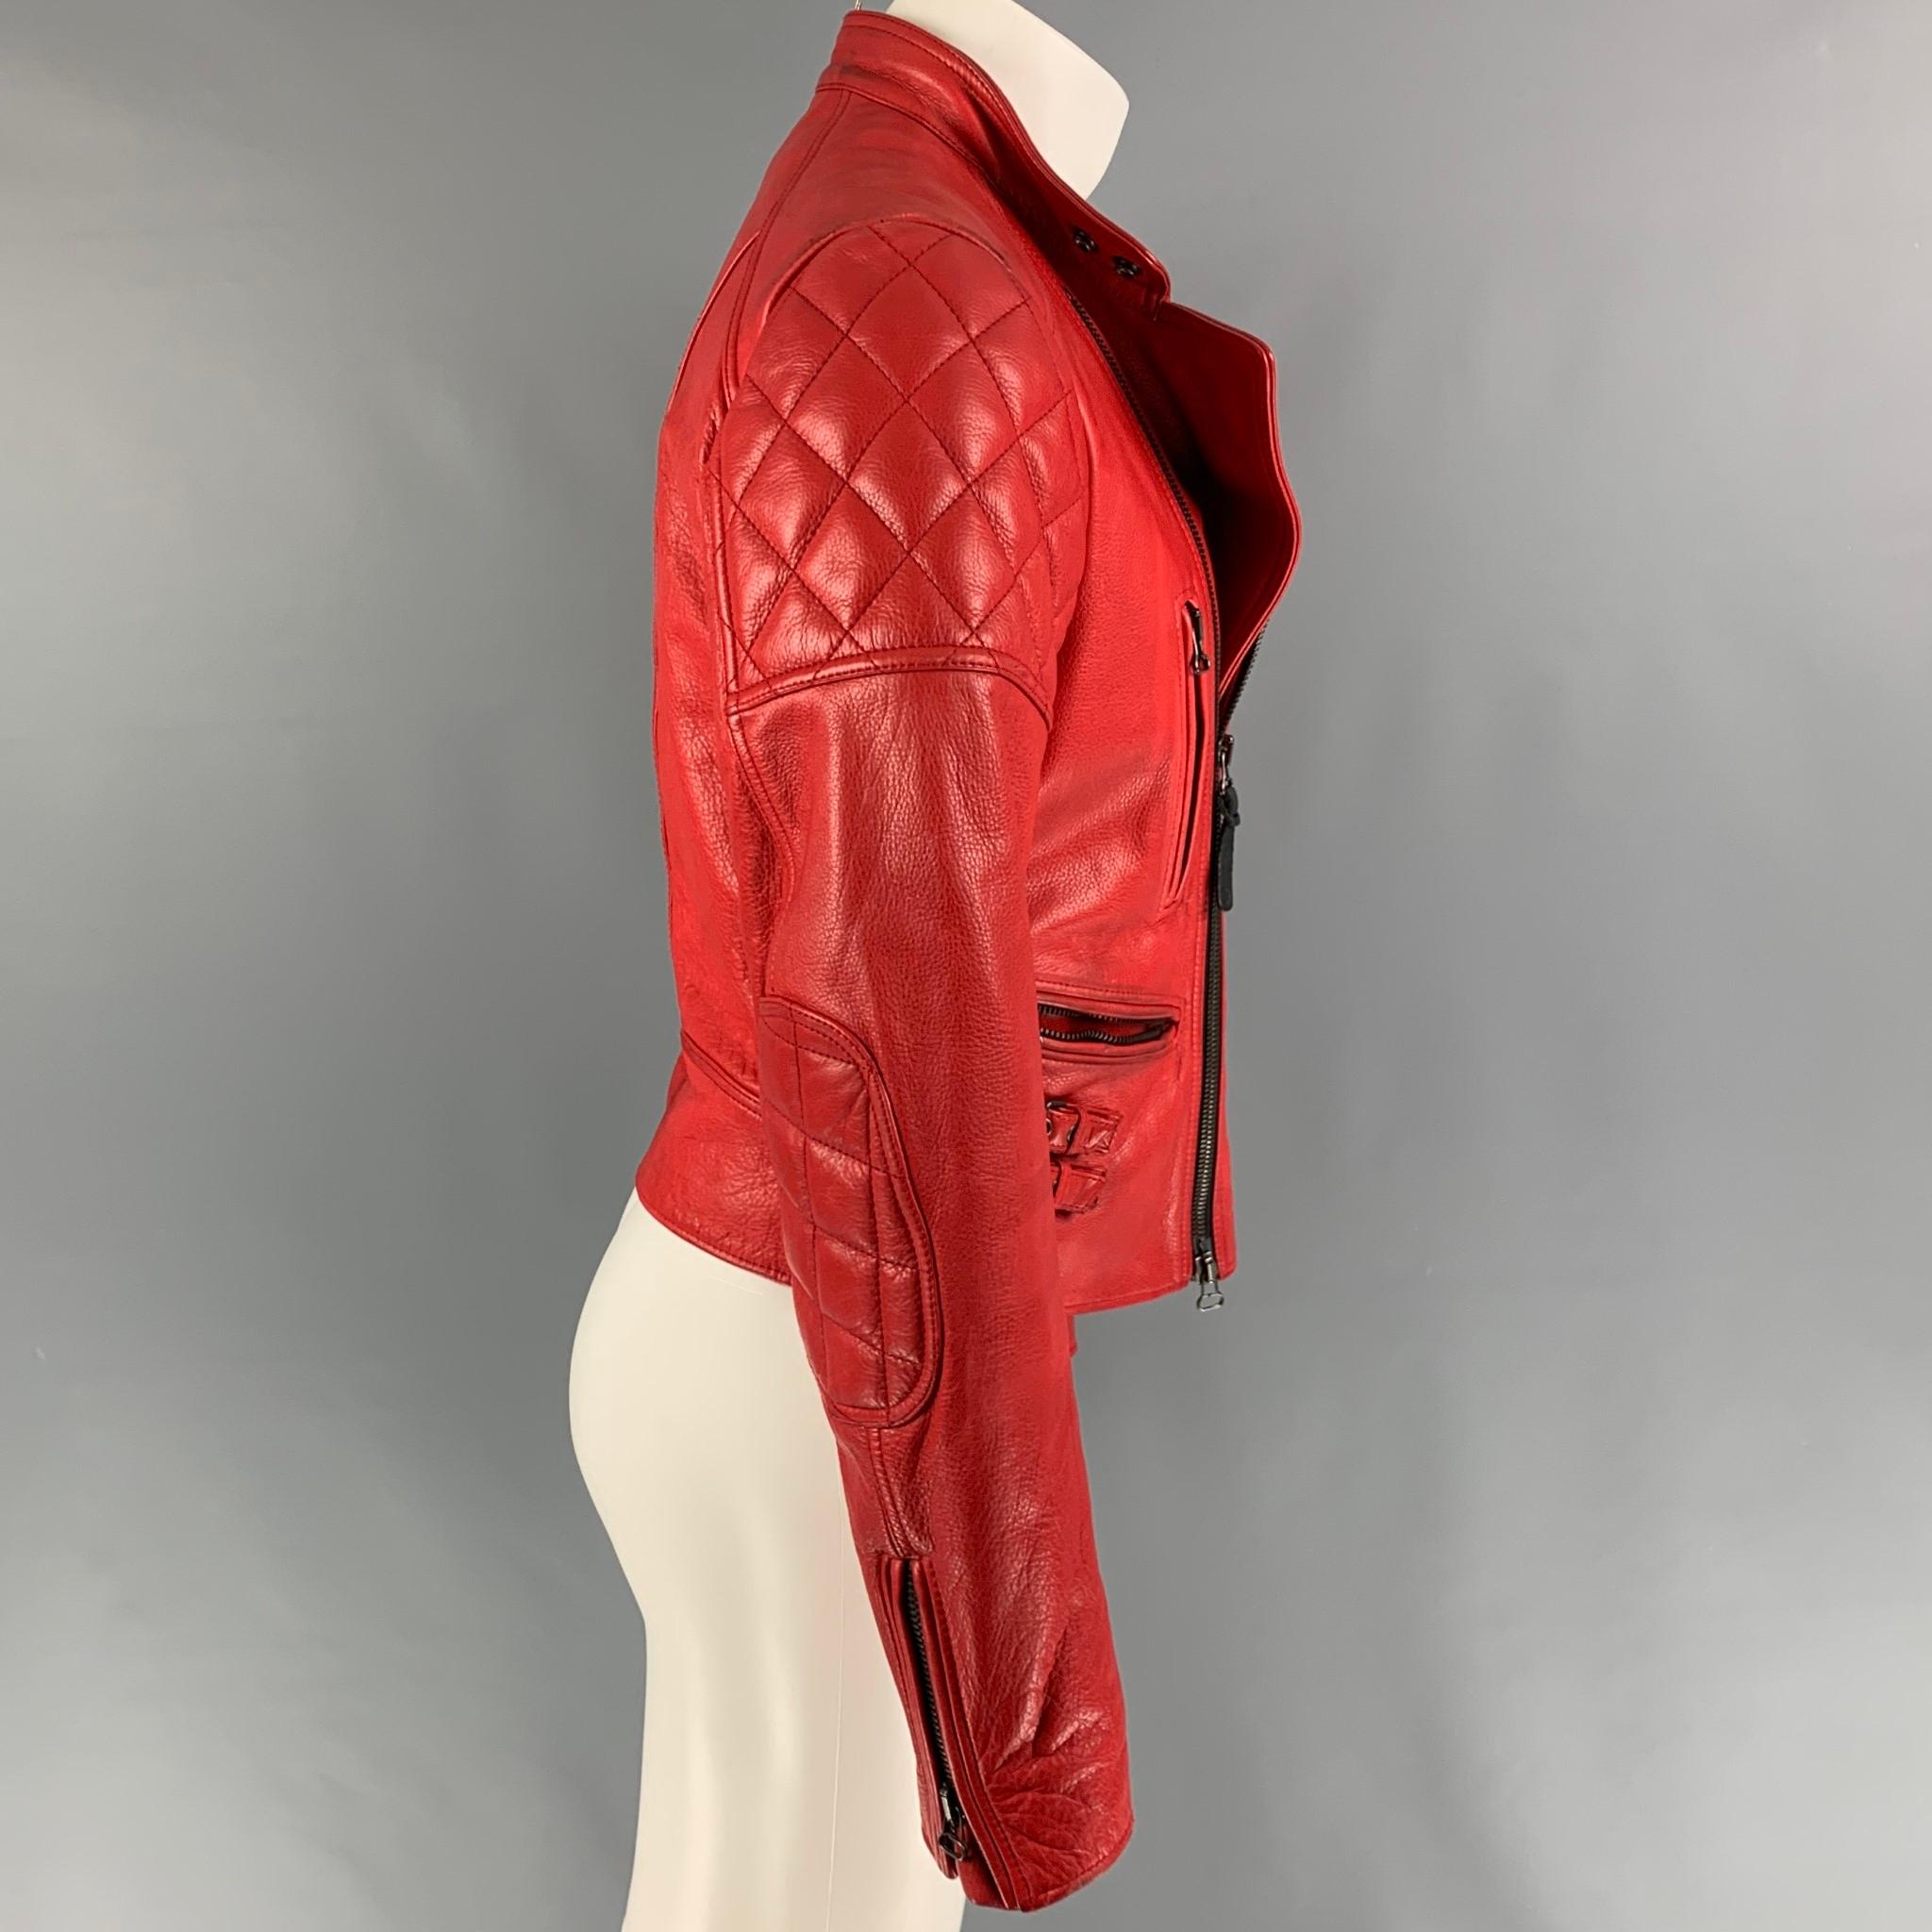 BELSTAFF 'Racing Perfecto Blouson' jacket comes in a red leather with a full liner featuring a motorcycle style, quilted panels, zipper pockets, strap details, zipped cuffs, snap button collar detail, and a full zip up closure. 

Very Good Pre-Owned